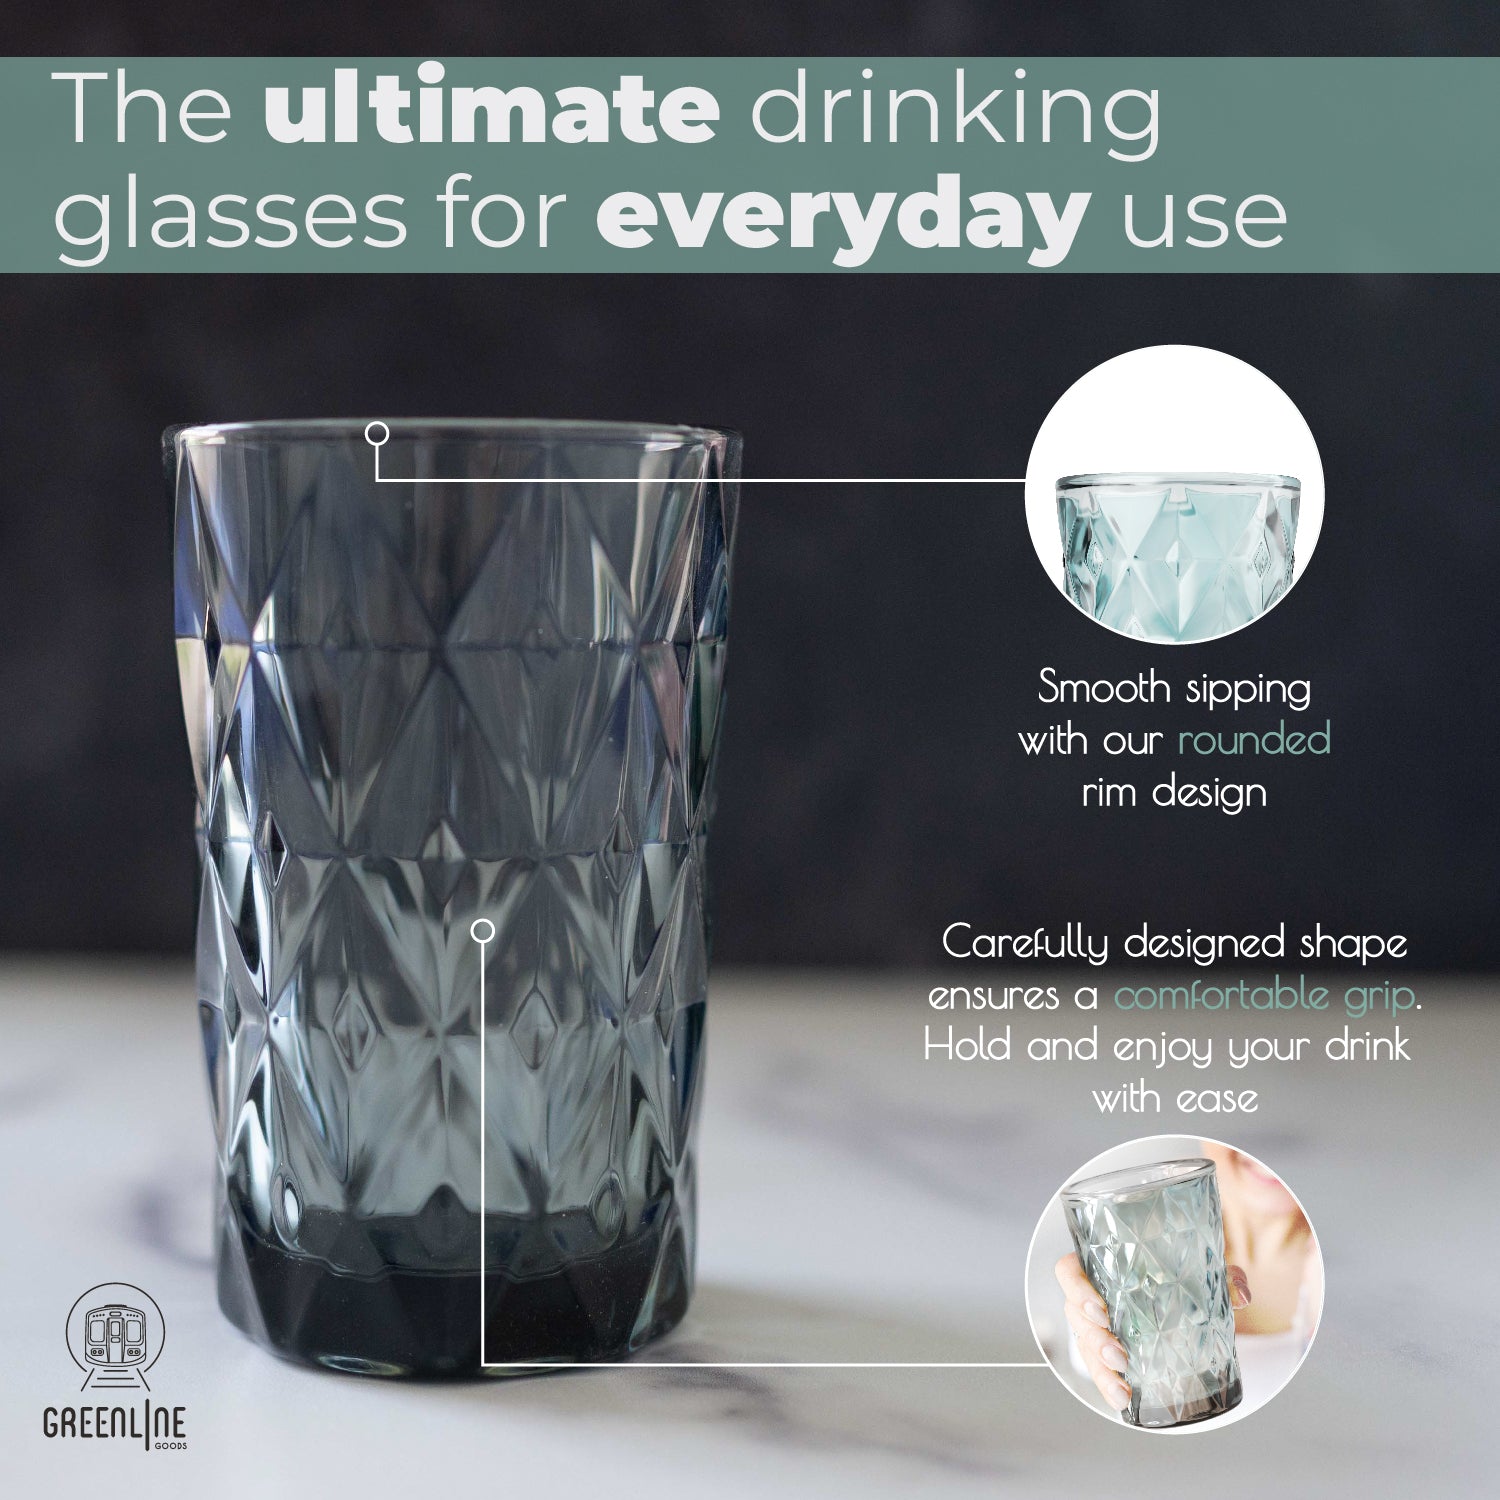 Your Glassware and Drink Just Got Engaged: Diamond Drinking